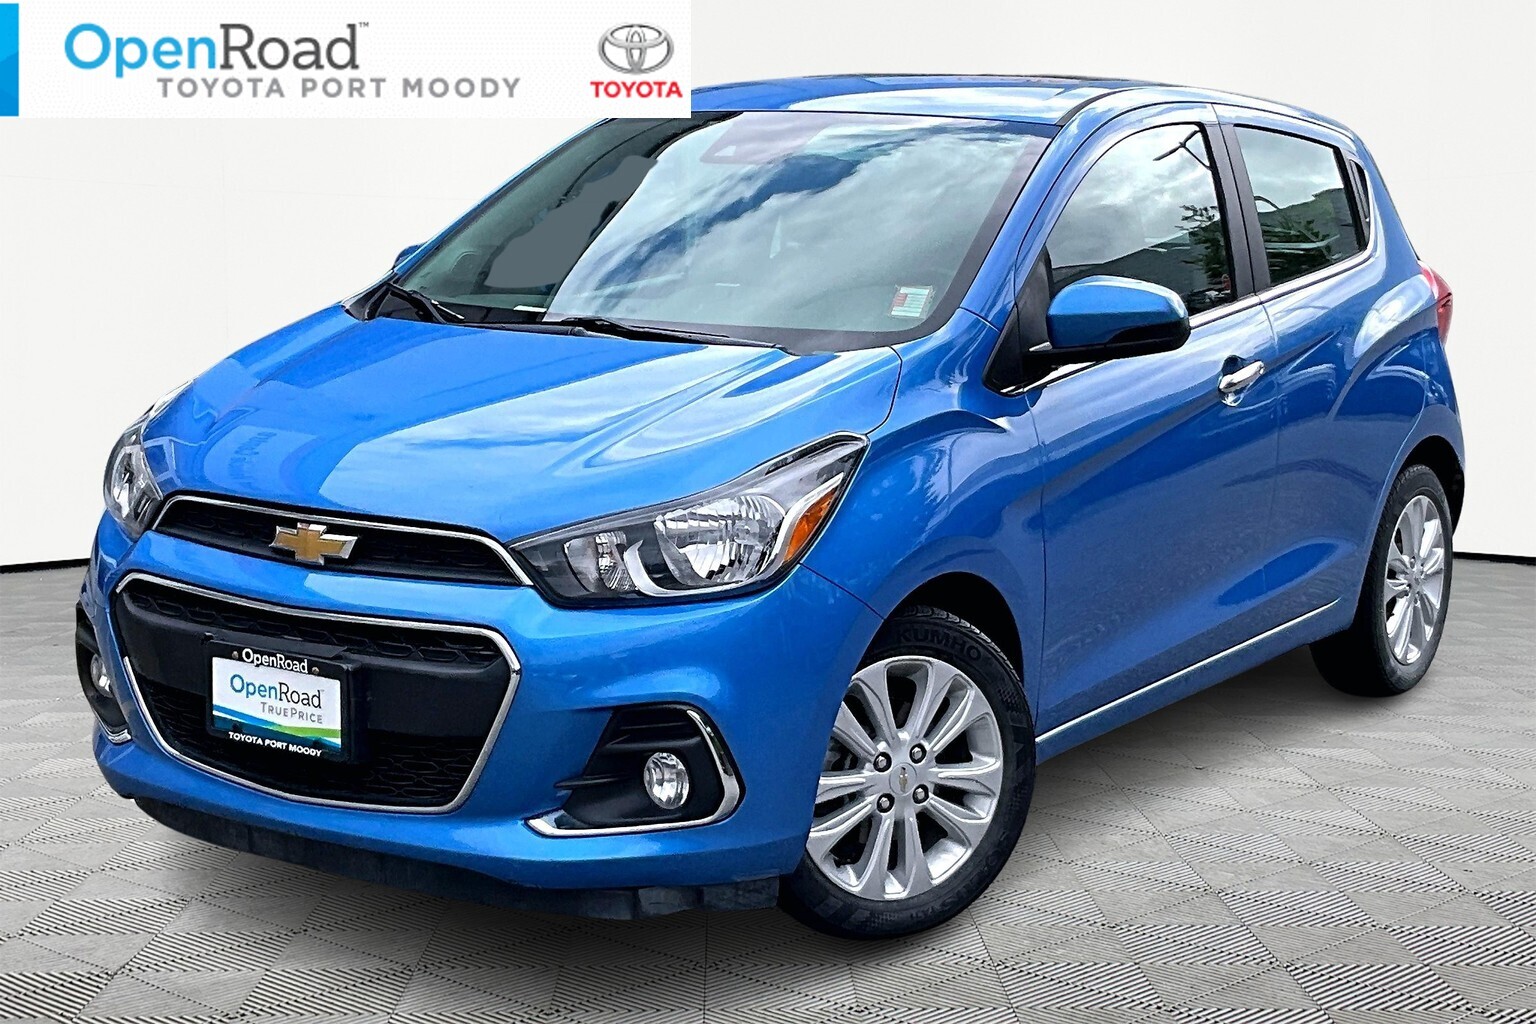 2017 Chevrolet Spark 2LT - CVT |OpenRoad True Price |No Claims |Service